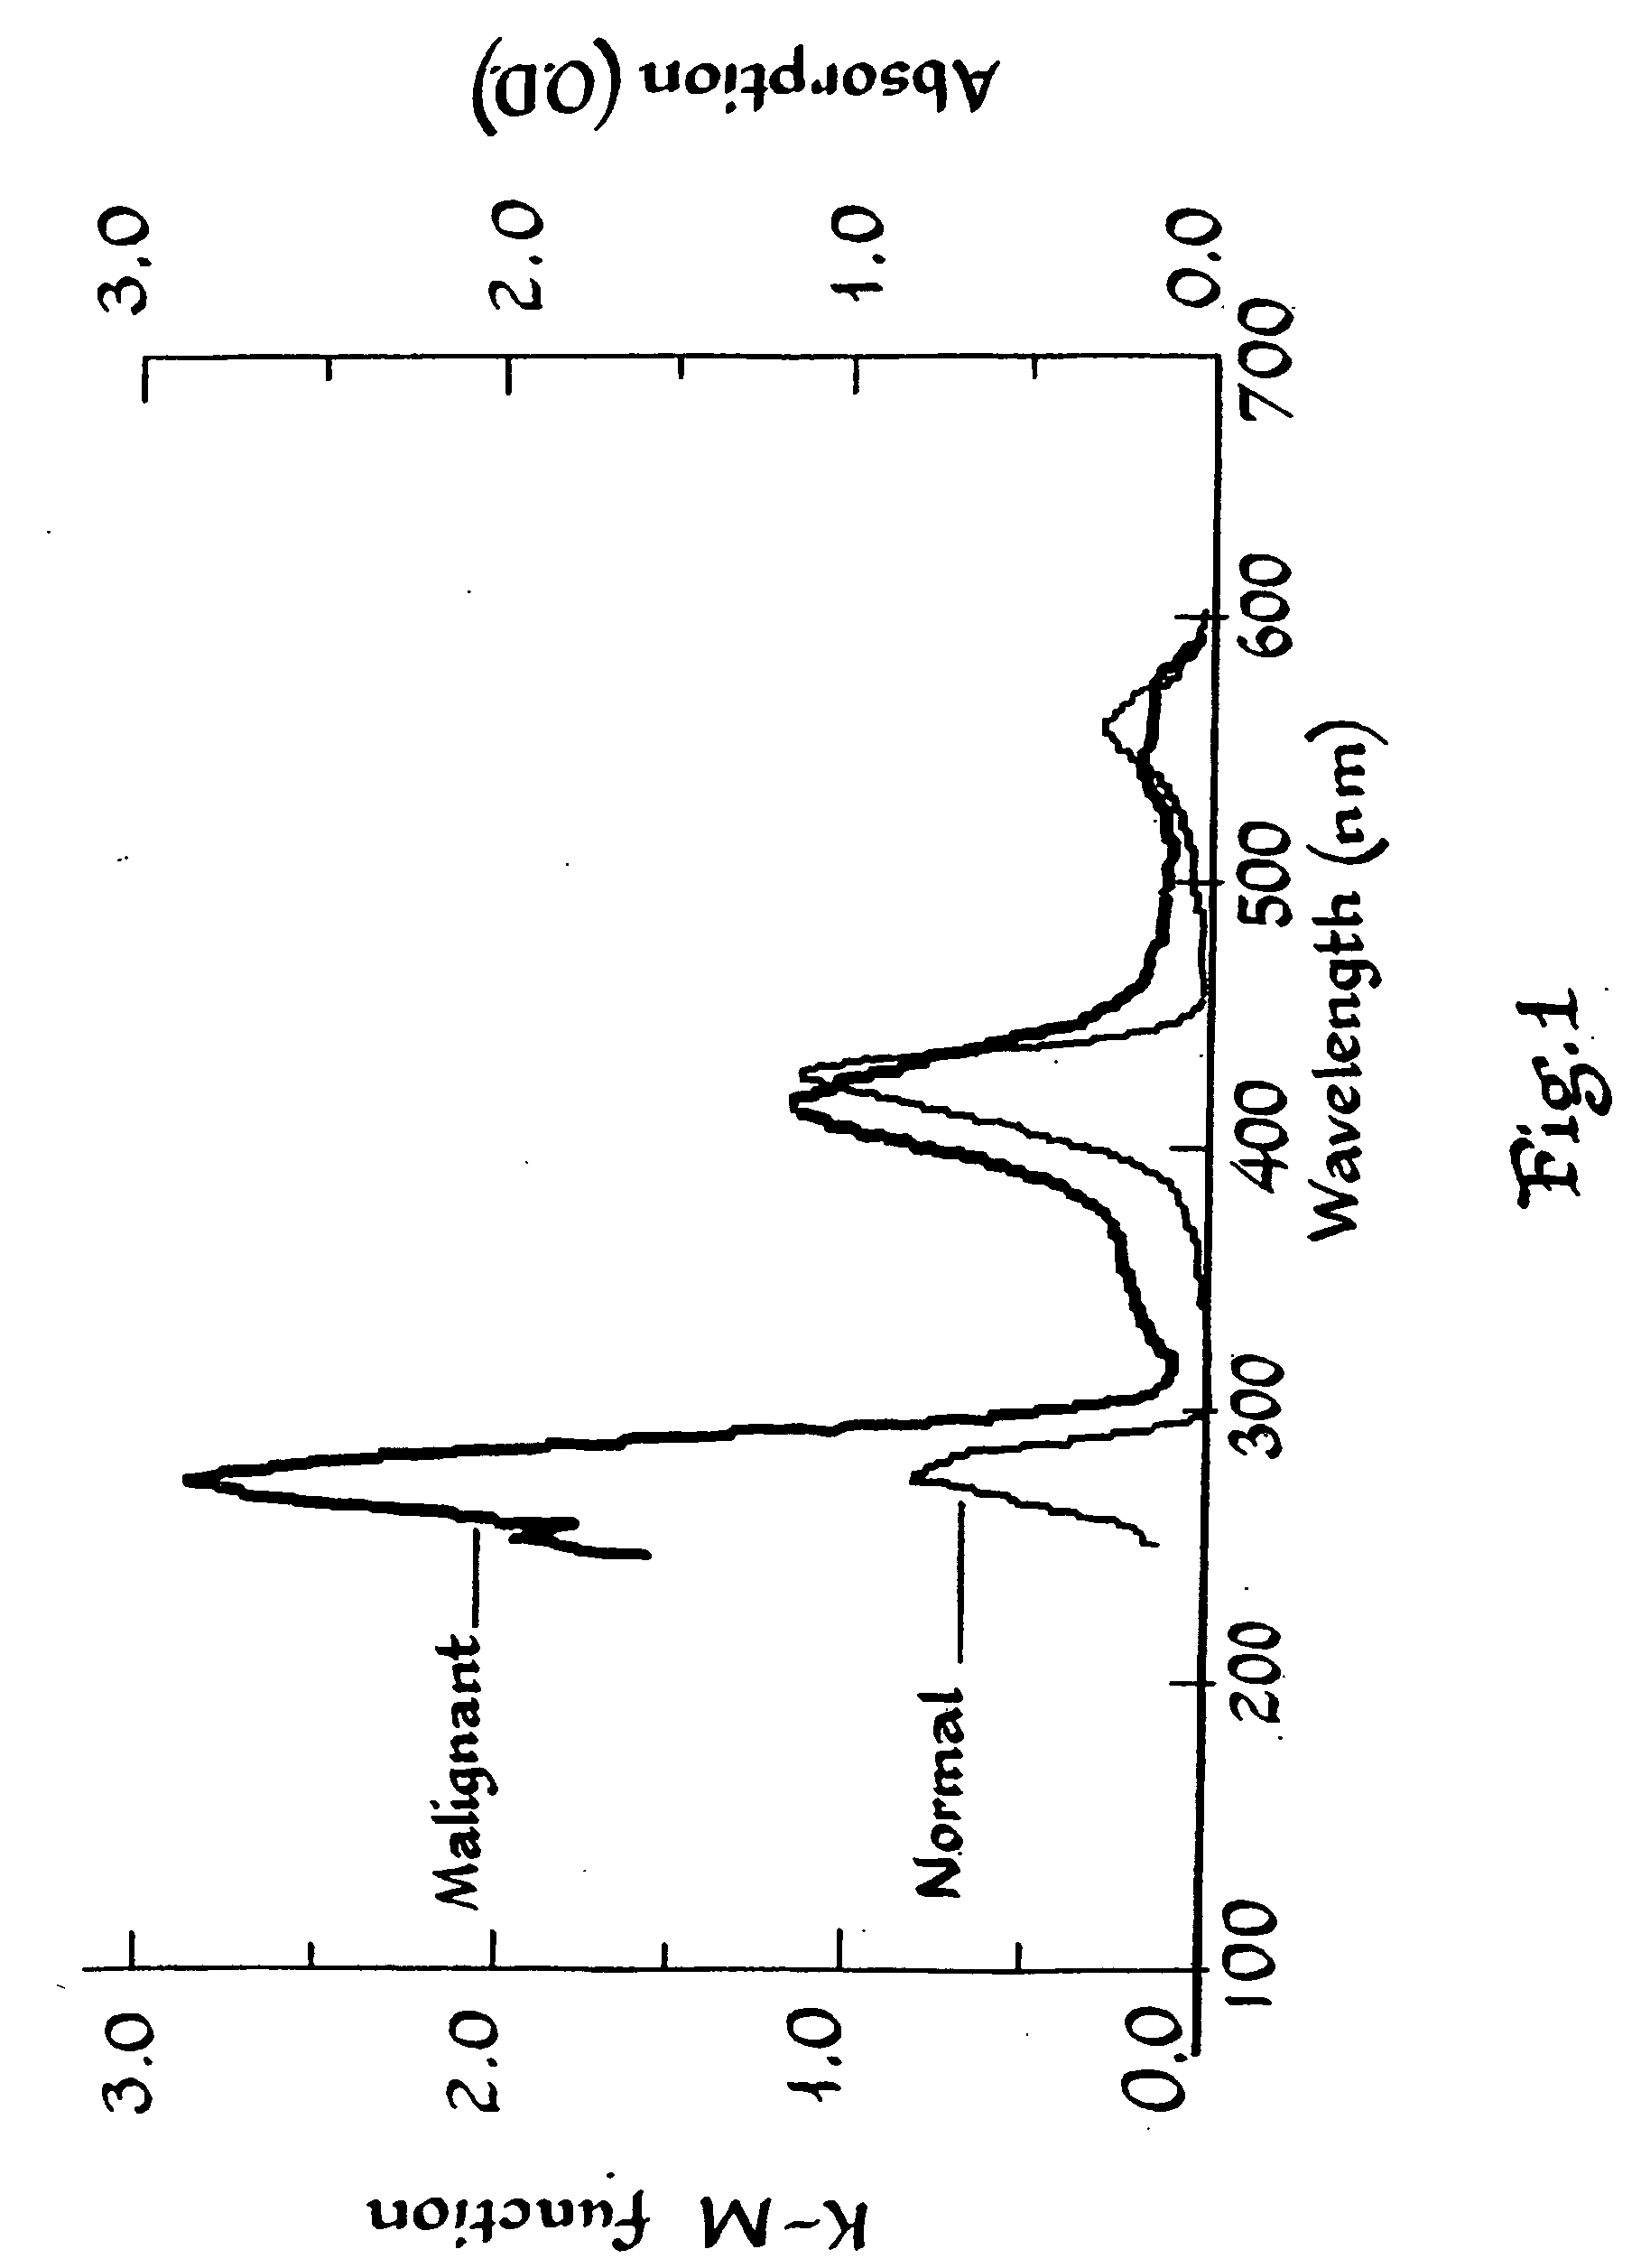 Differential photochemical and photomechanical processing